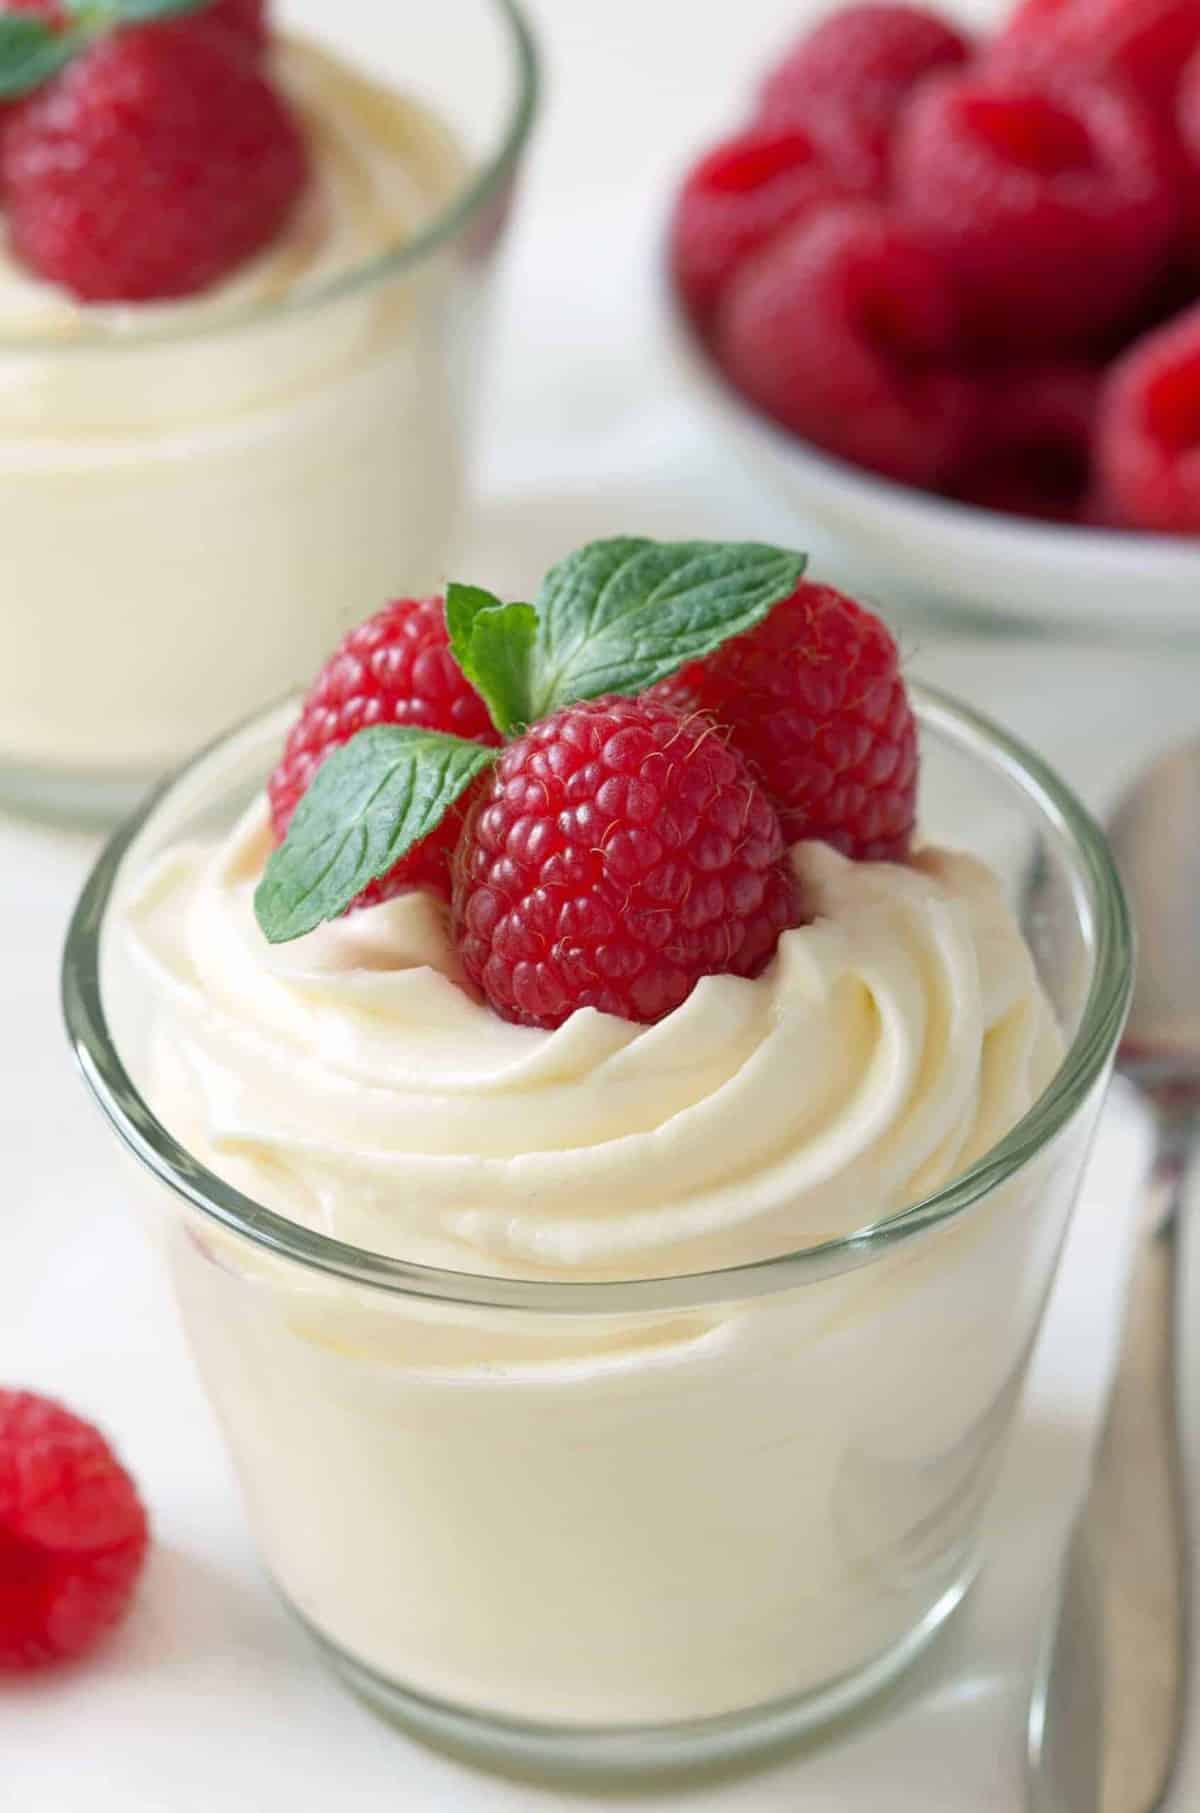 Easy white chocolate mousse made with cream cheese for an amazingly delicious treat that's perfect for Valentine's Day or a random Tuesday! Perfect for your sweetie!